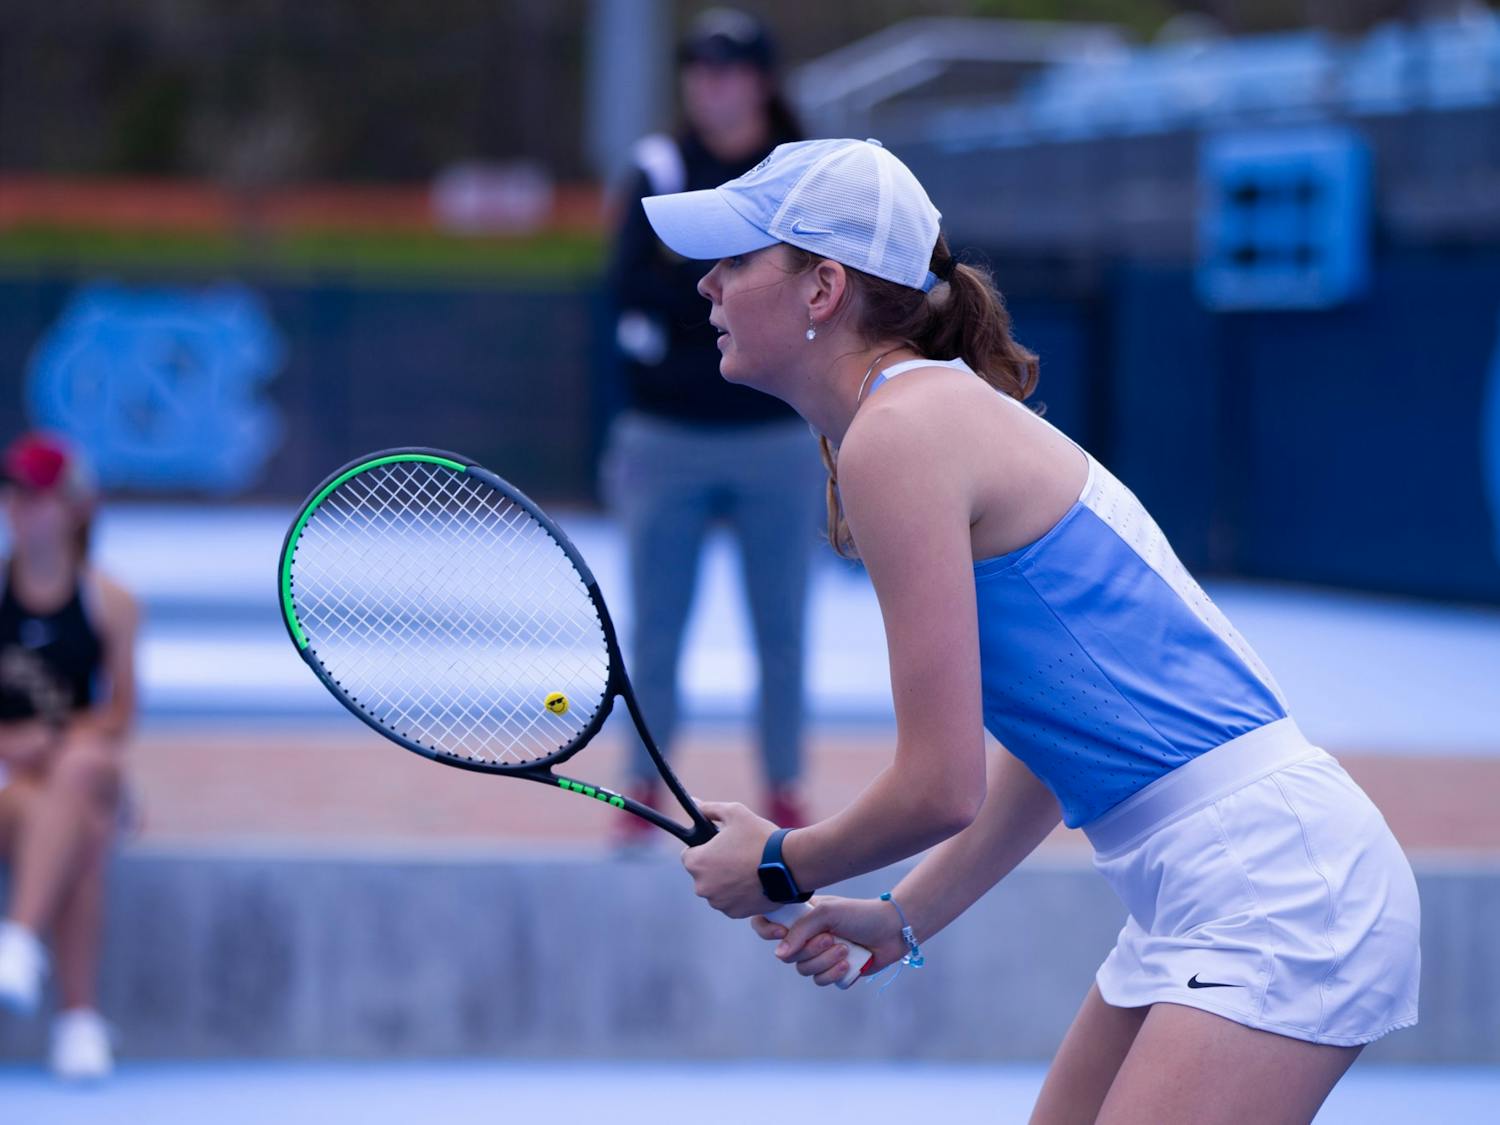 UNC senior Elizabeth Scotty looking at her opponents during a match against the Florida State University Seminoles at the Cone-Kenfield Tennis Center on Friday, March 31, 2023. The Tar Heels won 6-1.